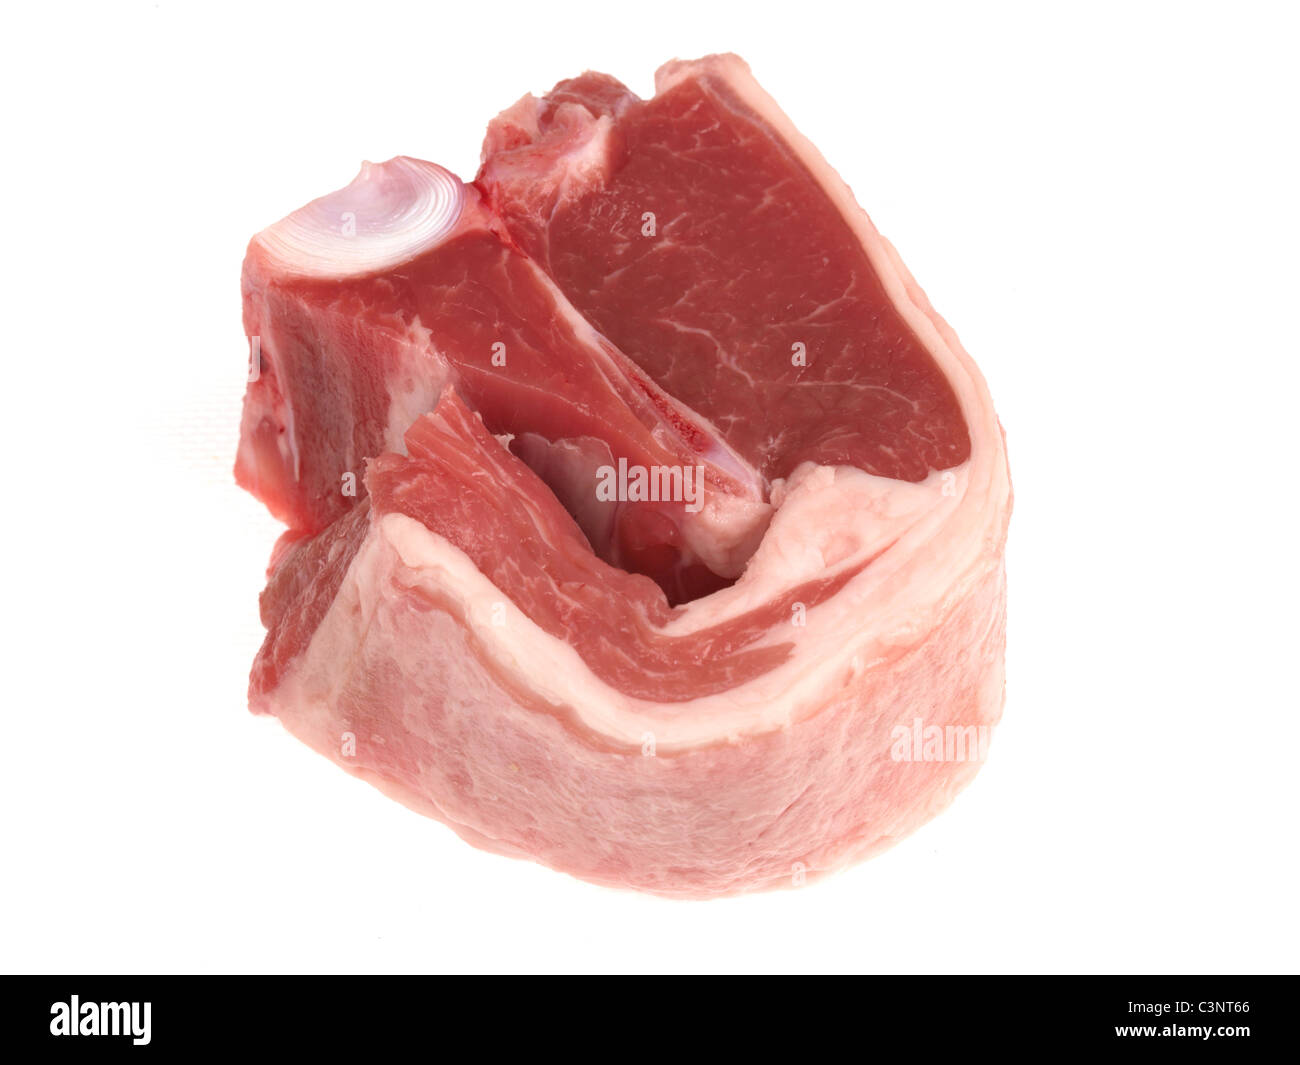 Fresh Uncooked Single Lamb Chop Against a White Background With No People And Copy Space Stock Photo